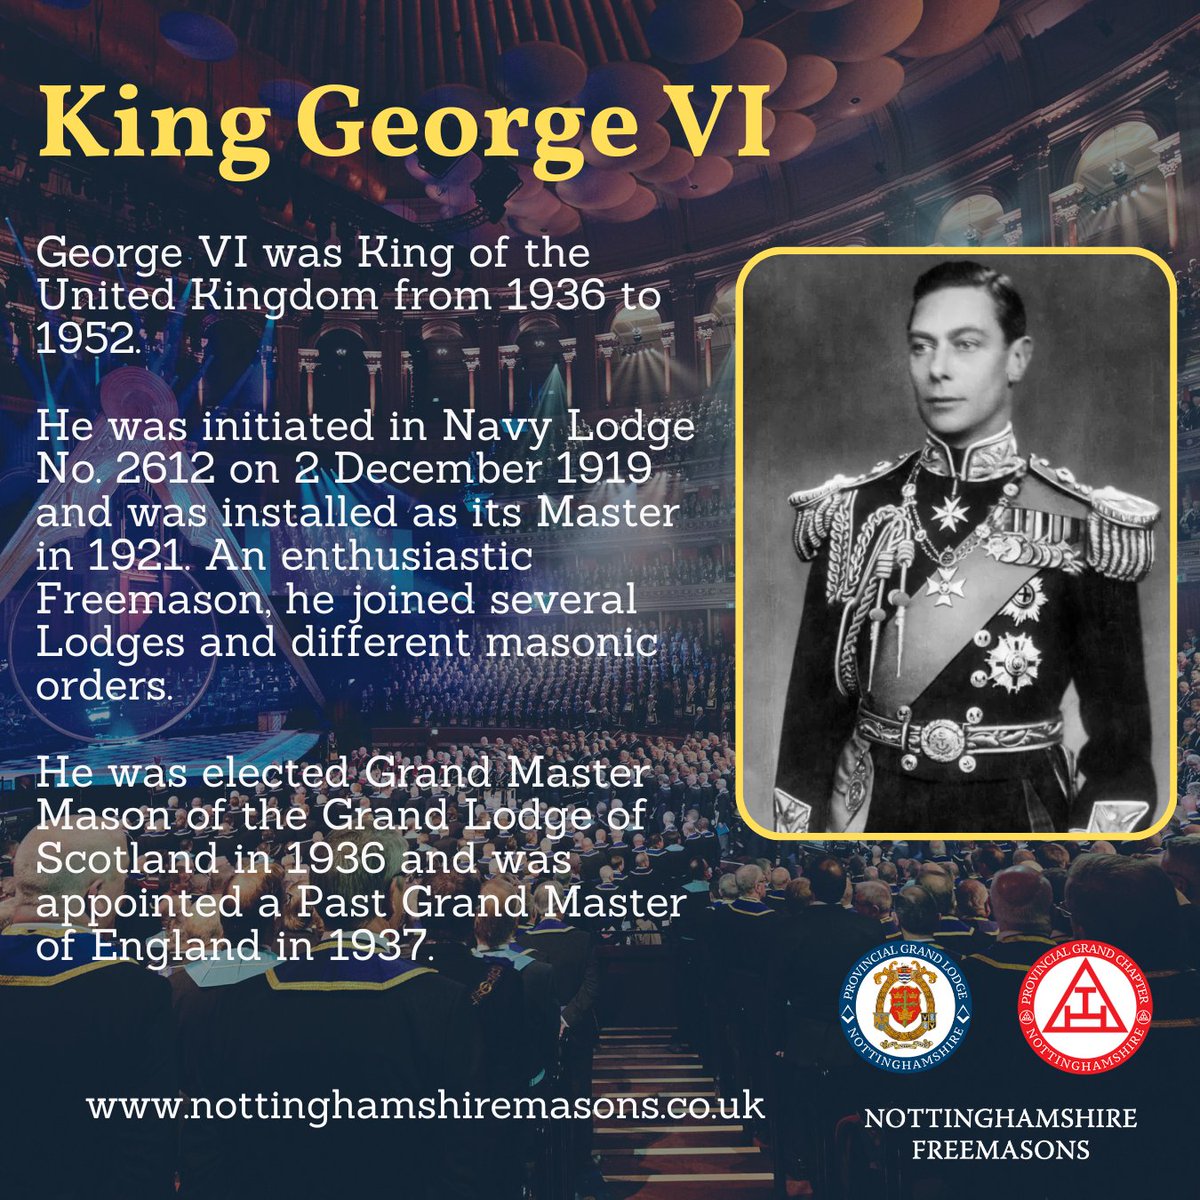 George VI was King of the United Kingdom from 1936 to 1952. George VI was initiated in Navy Lodge No. 2612 on 2 December 1919 and was installed as its Master in 1921. Learn More and Join Us nottinghamshiremasons.co.uk/becoming-a-fre… #Freemasons